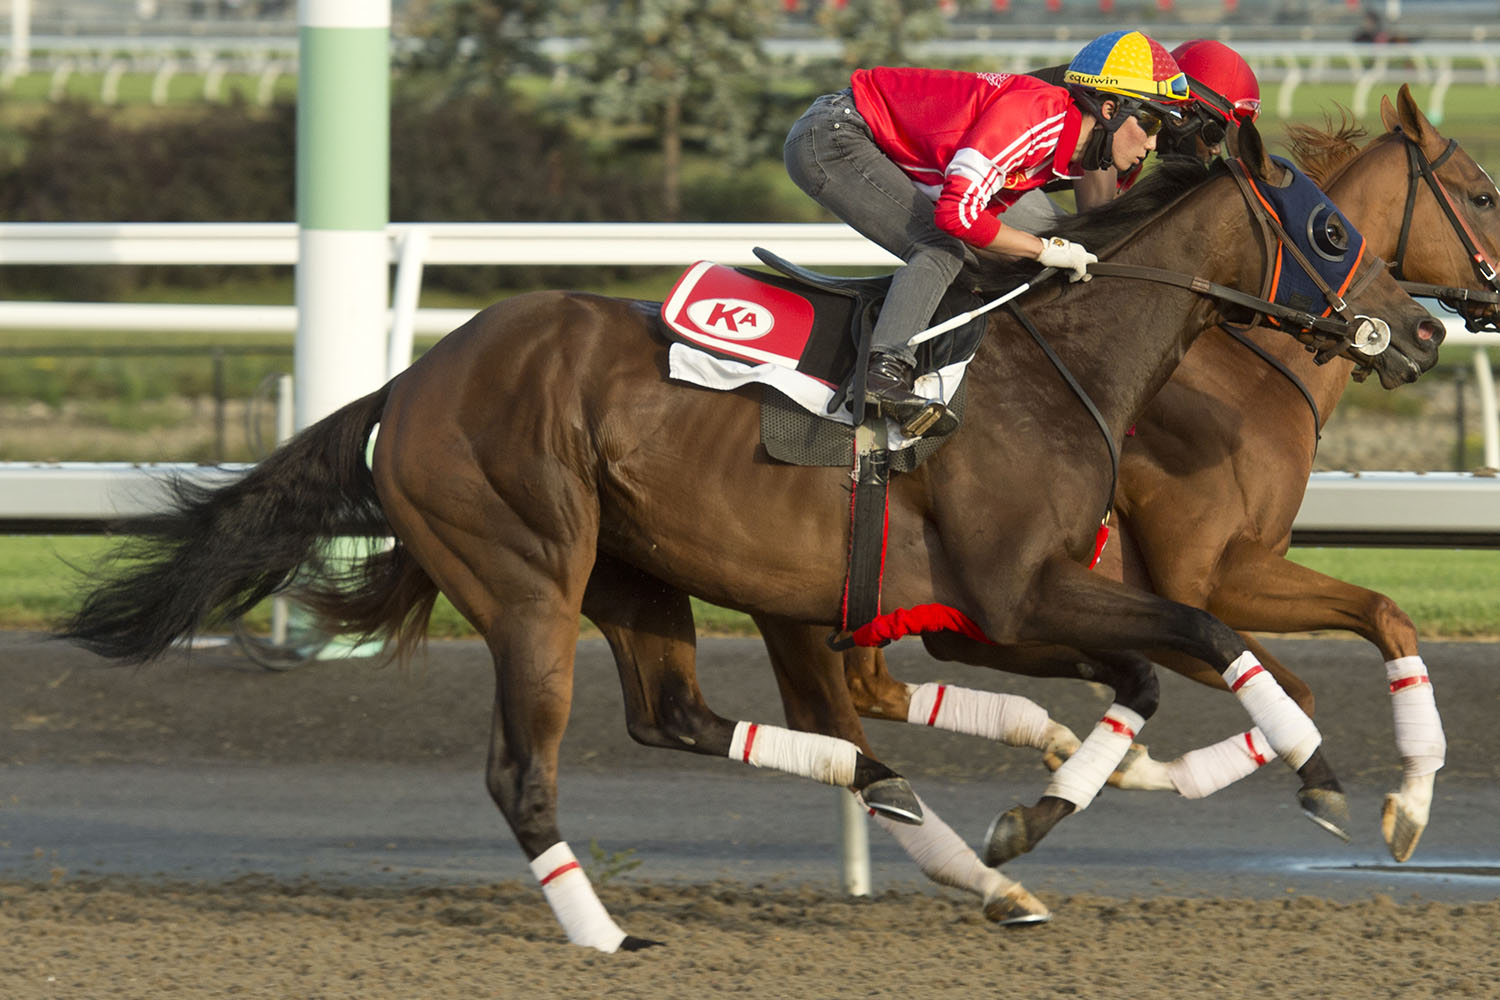 Queen’s Plate post position draw to be live streamed on September 9